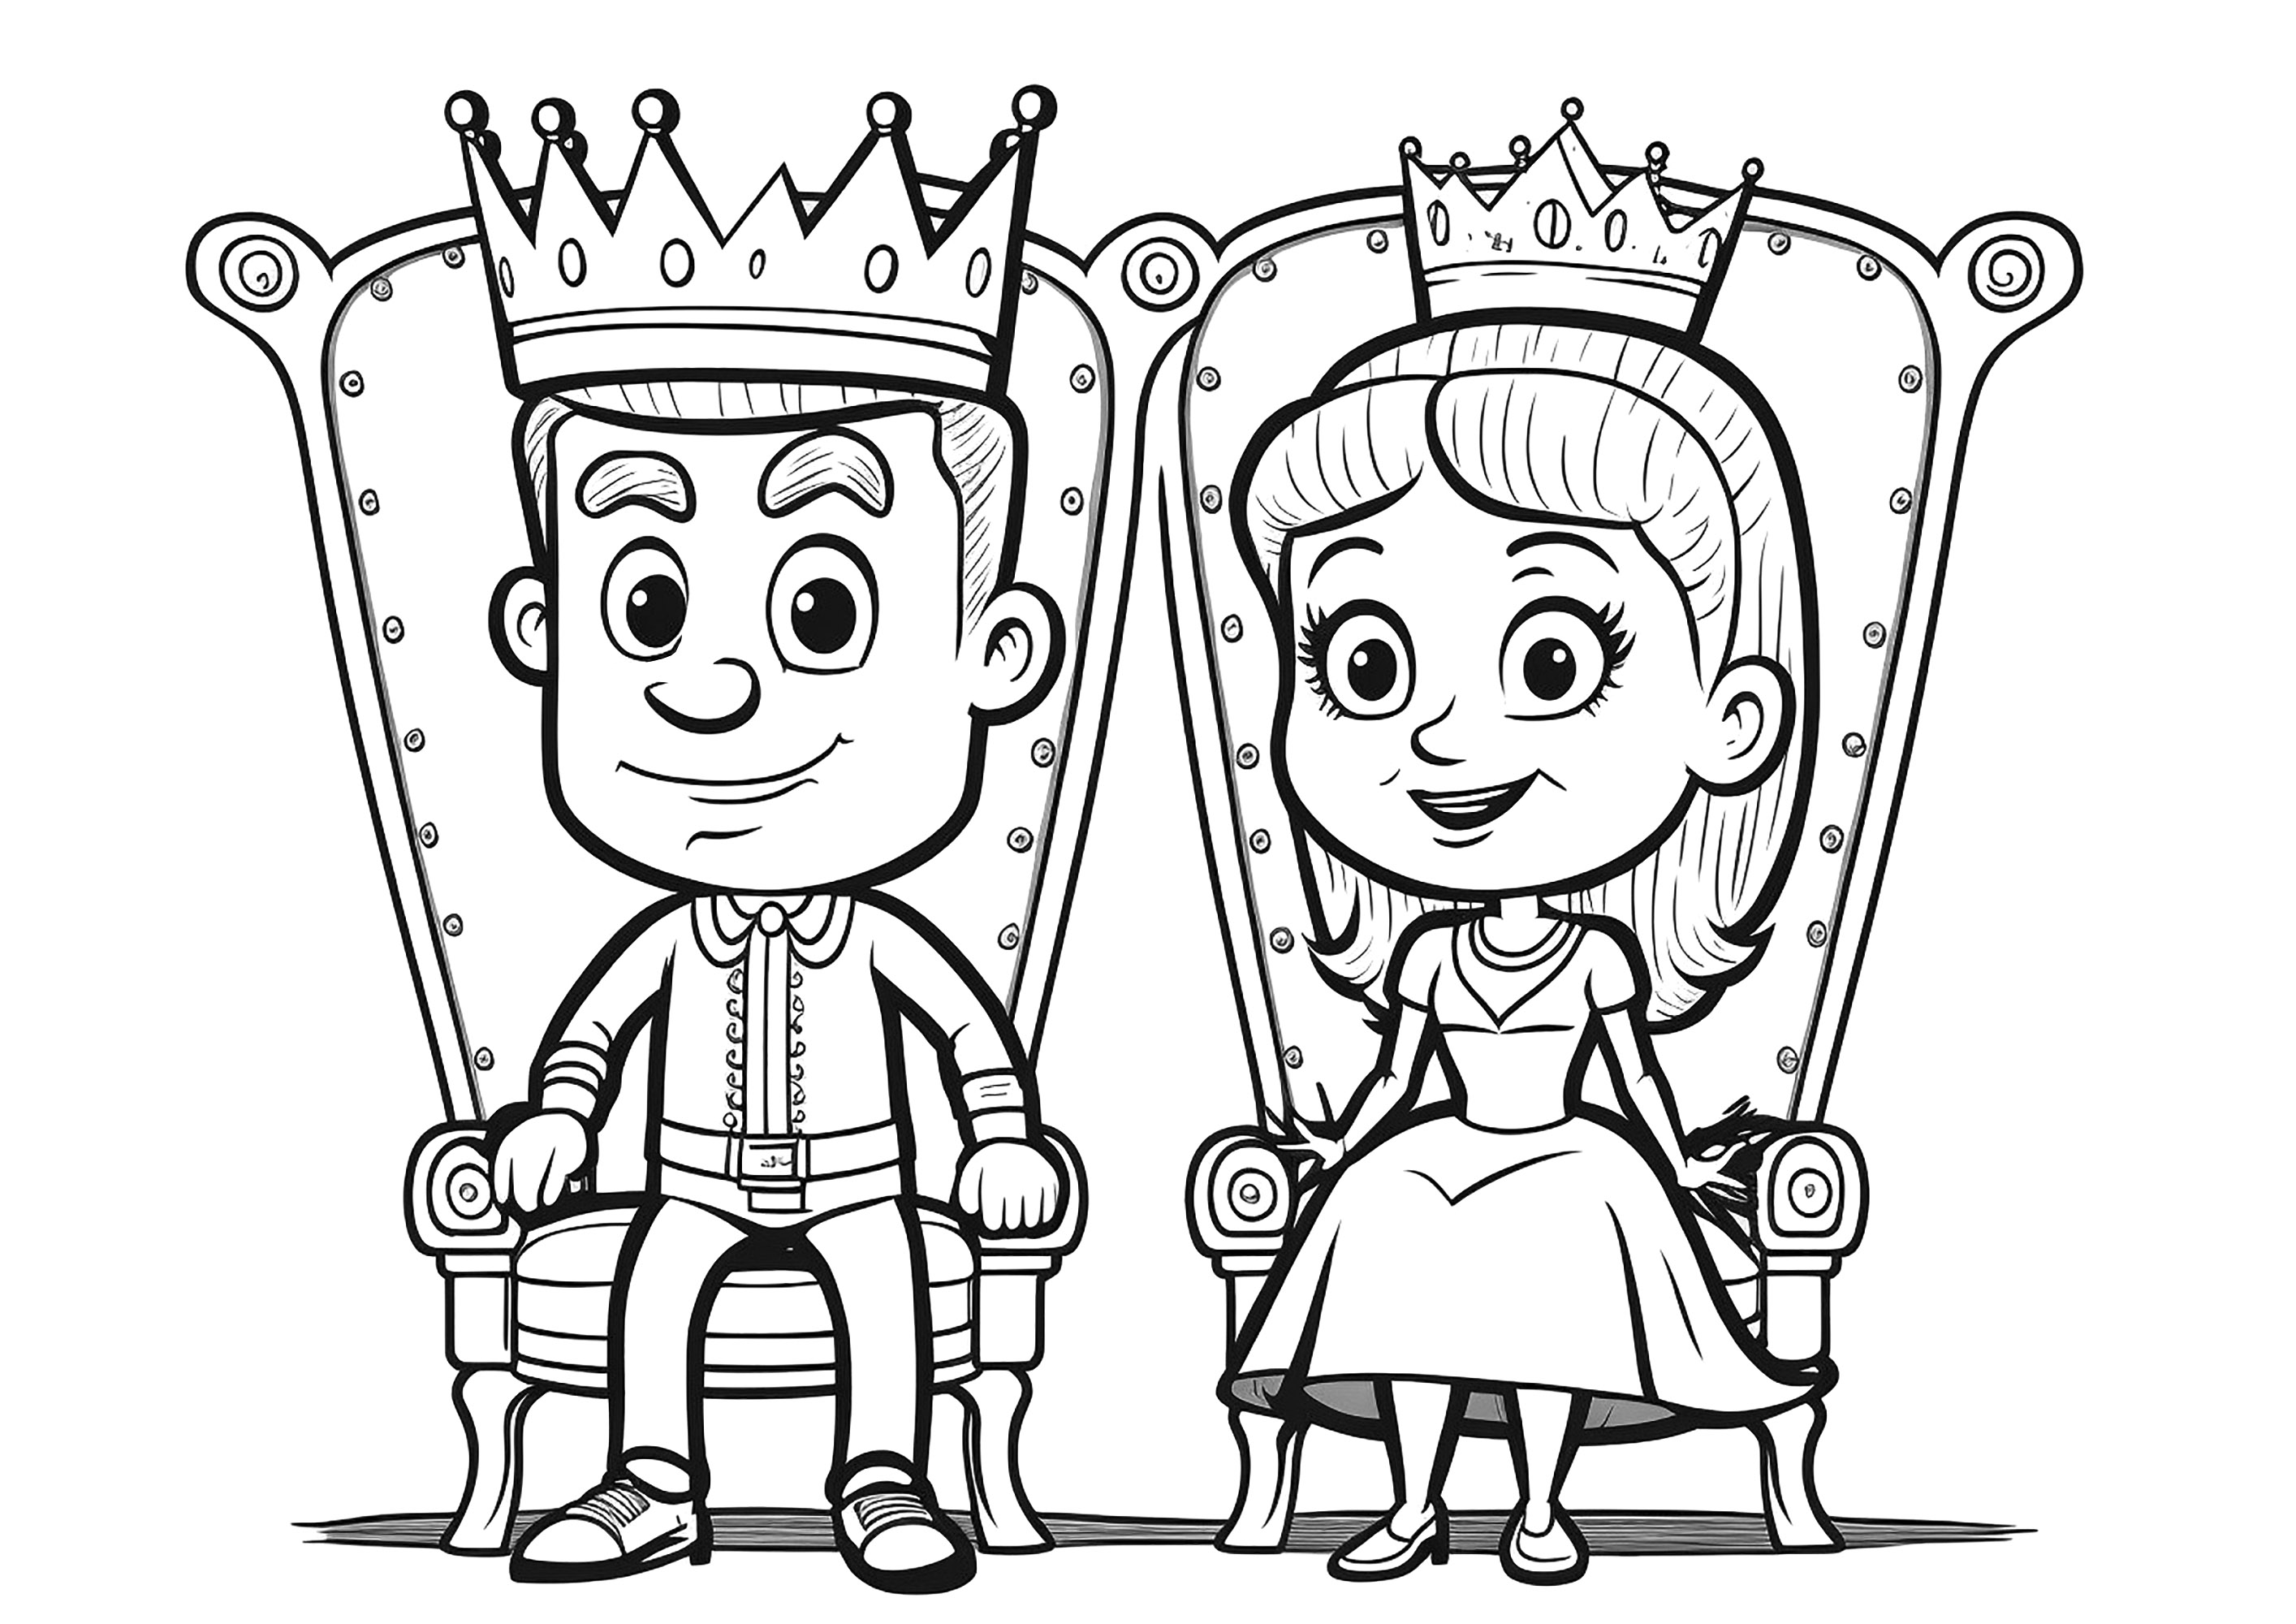 Q is for Queen (4-5 and 6-8 year old class) - Kindred Art Studio